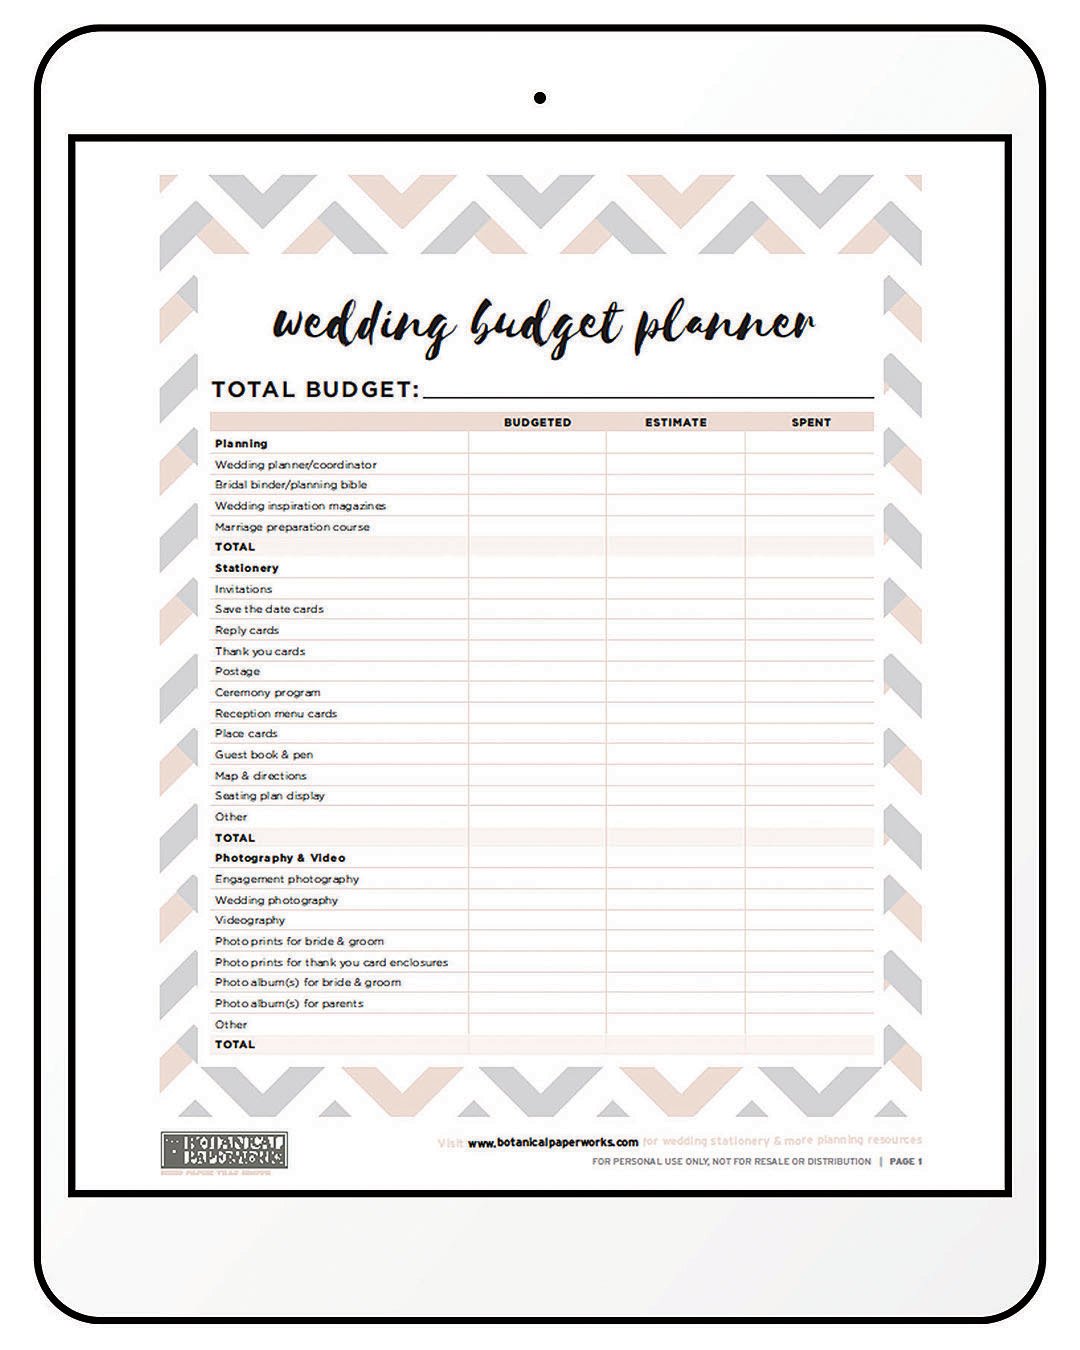 Check-List and To-Do List Coordinator Printable Itinerary Timeline My Wedding Planner Organizer Printable Budget Instant Download